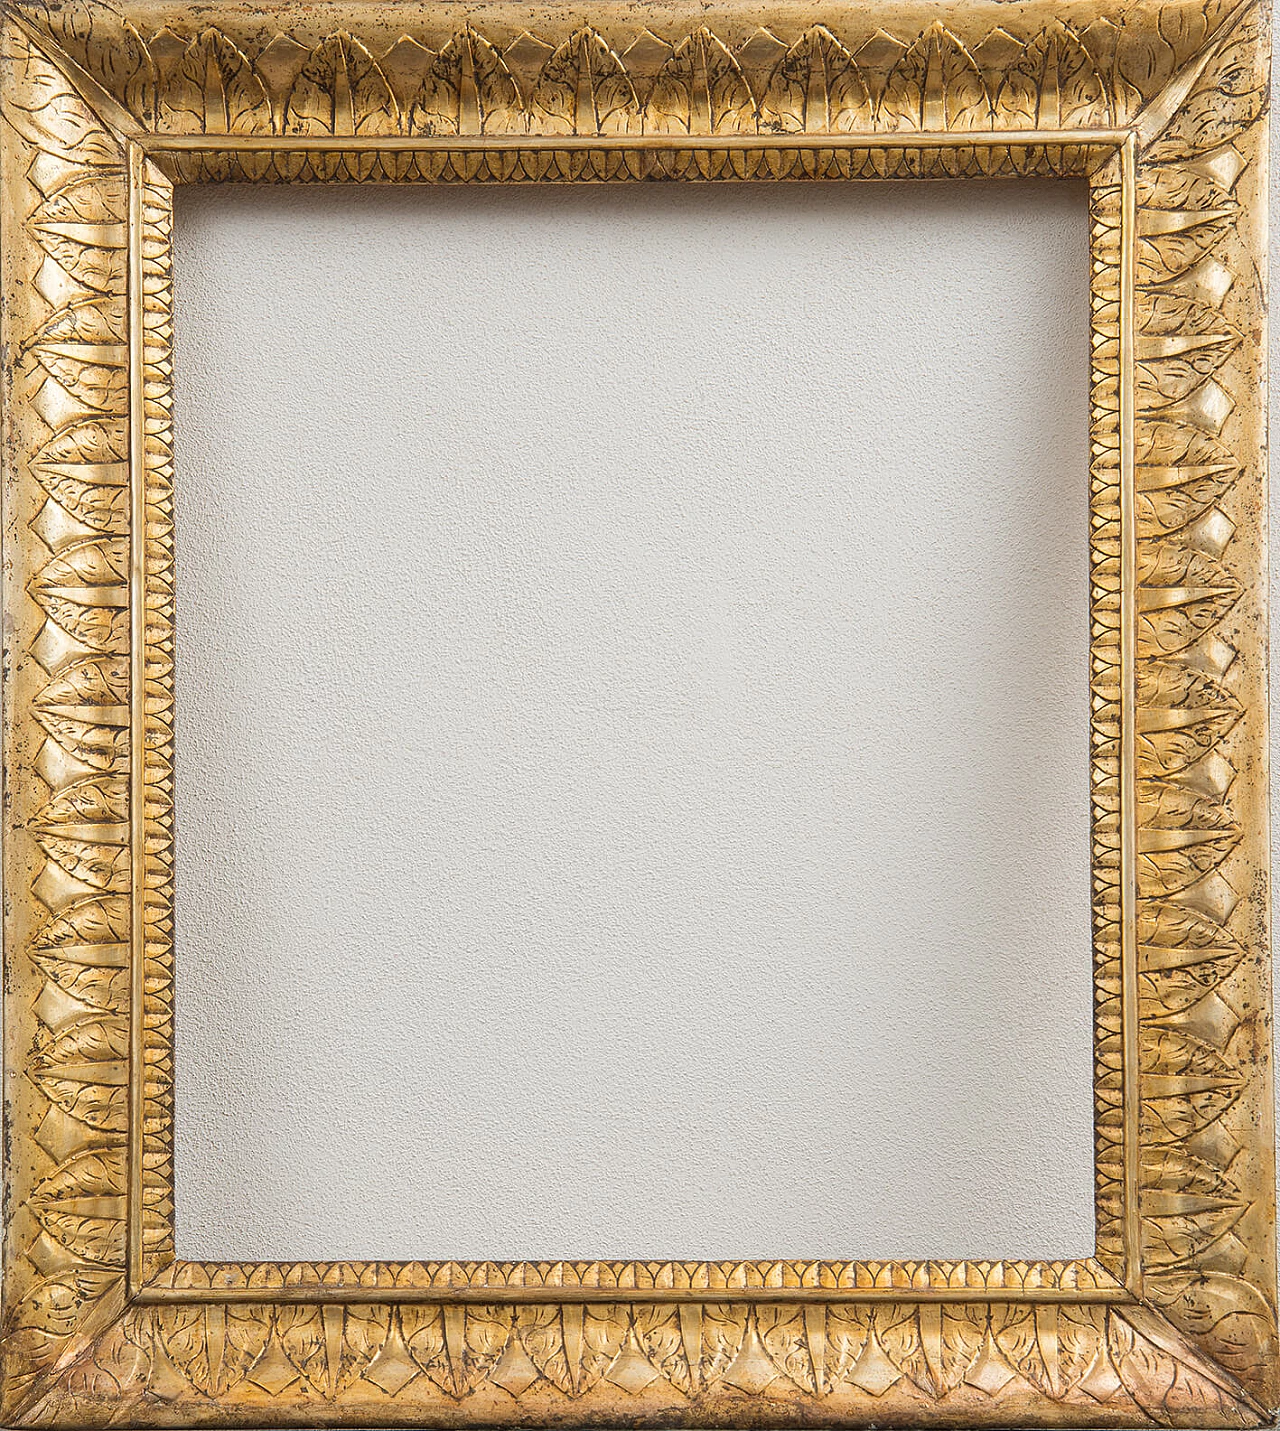 Neapolitan Empire carved and gilded wood frame, early 19th century 1